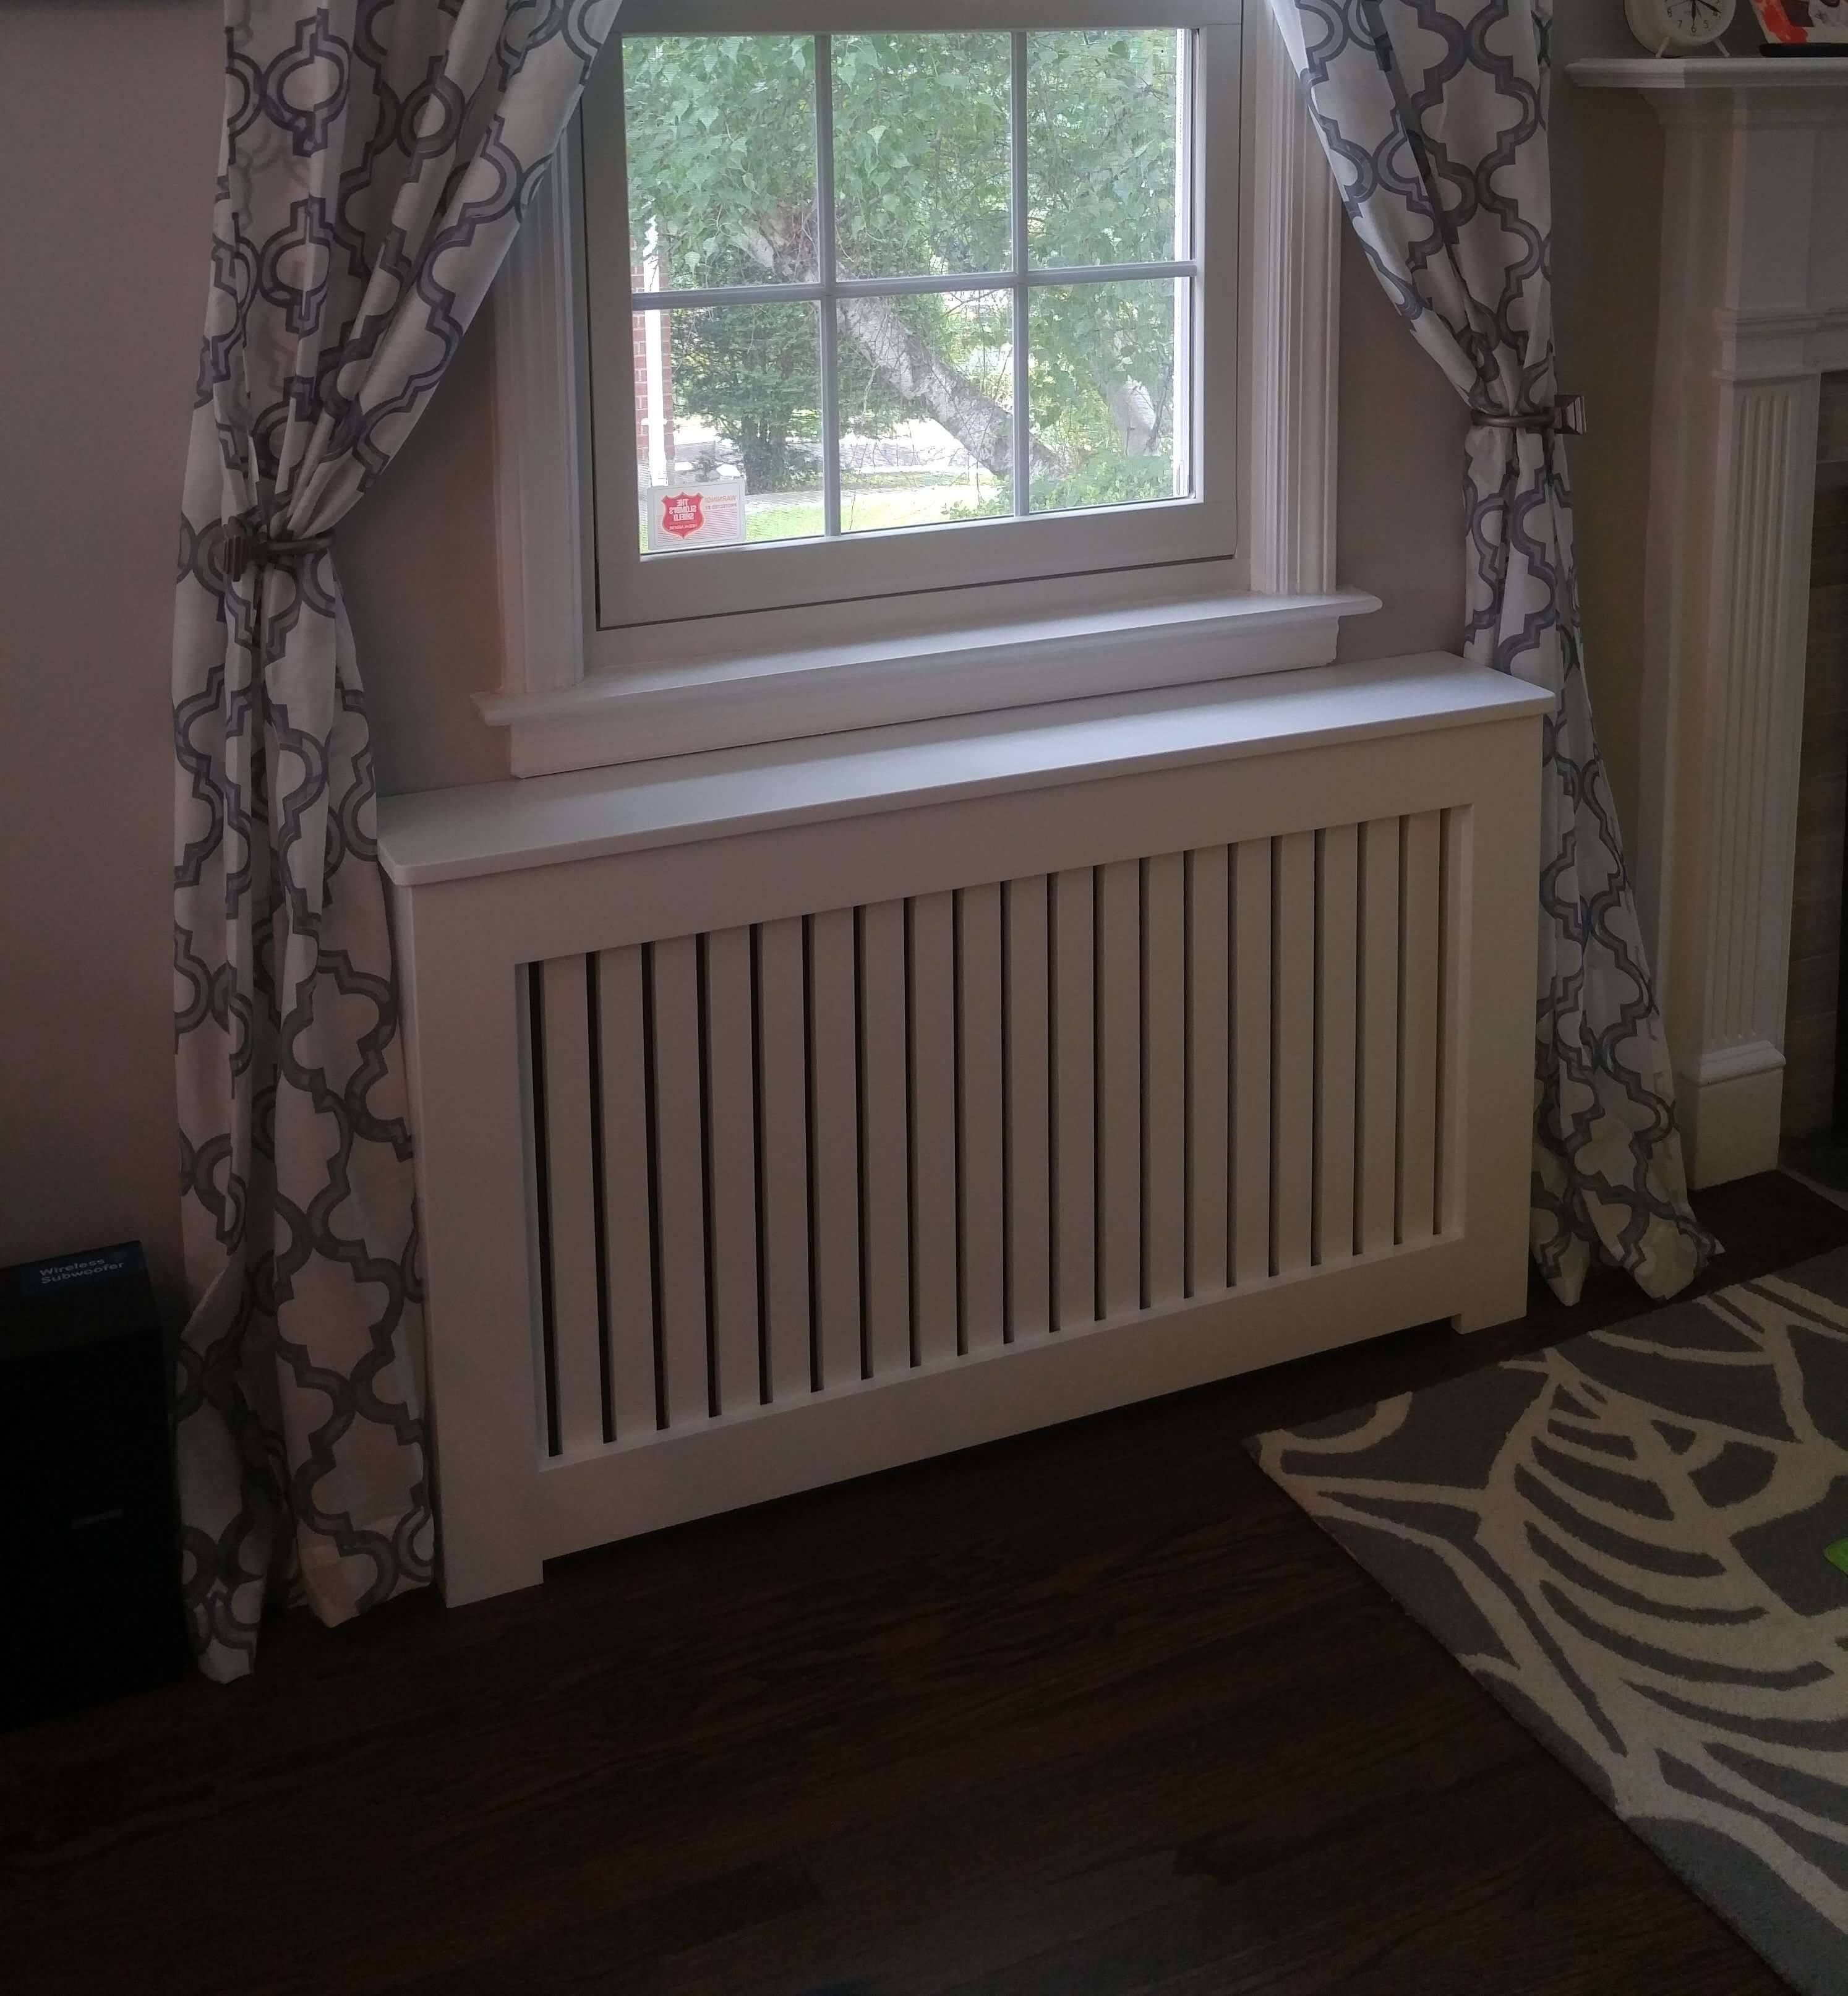 Radiator Covers (96 products) compare prices today »